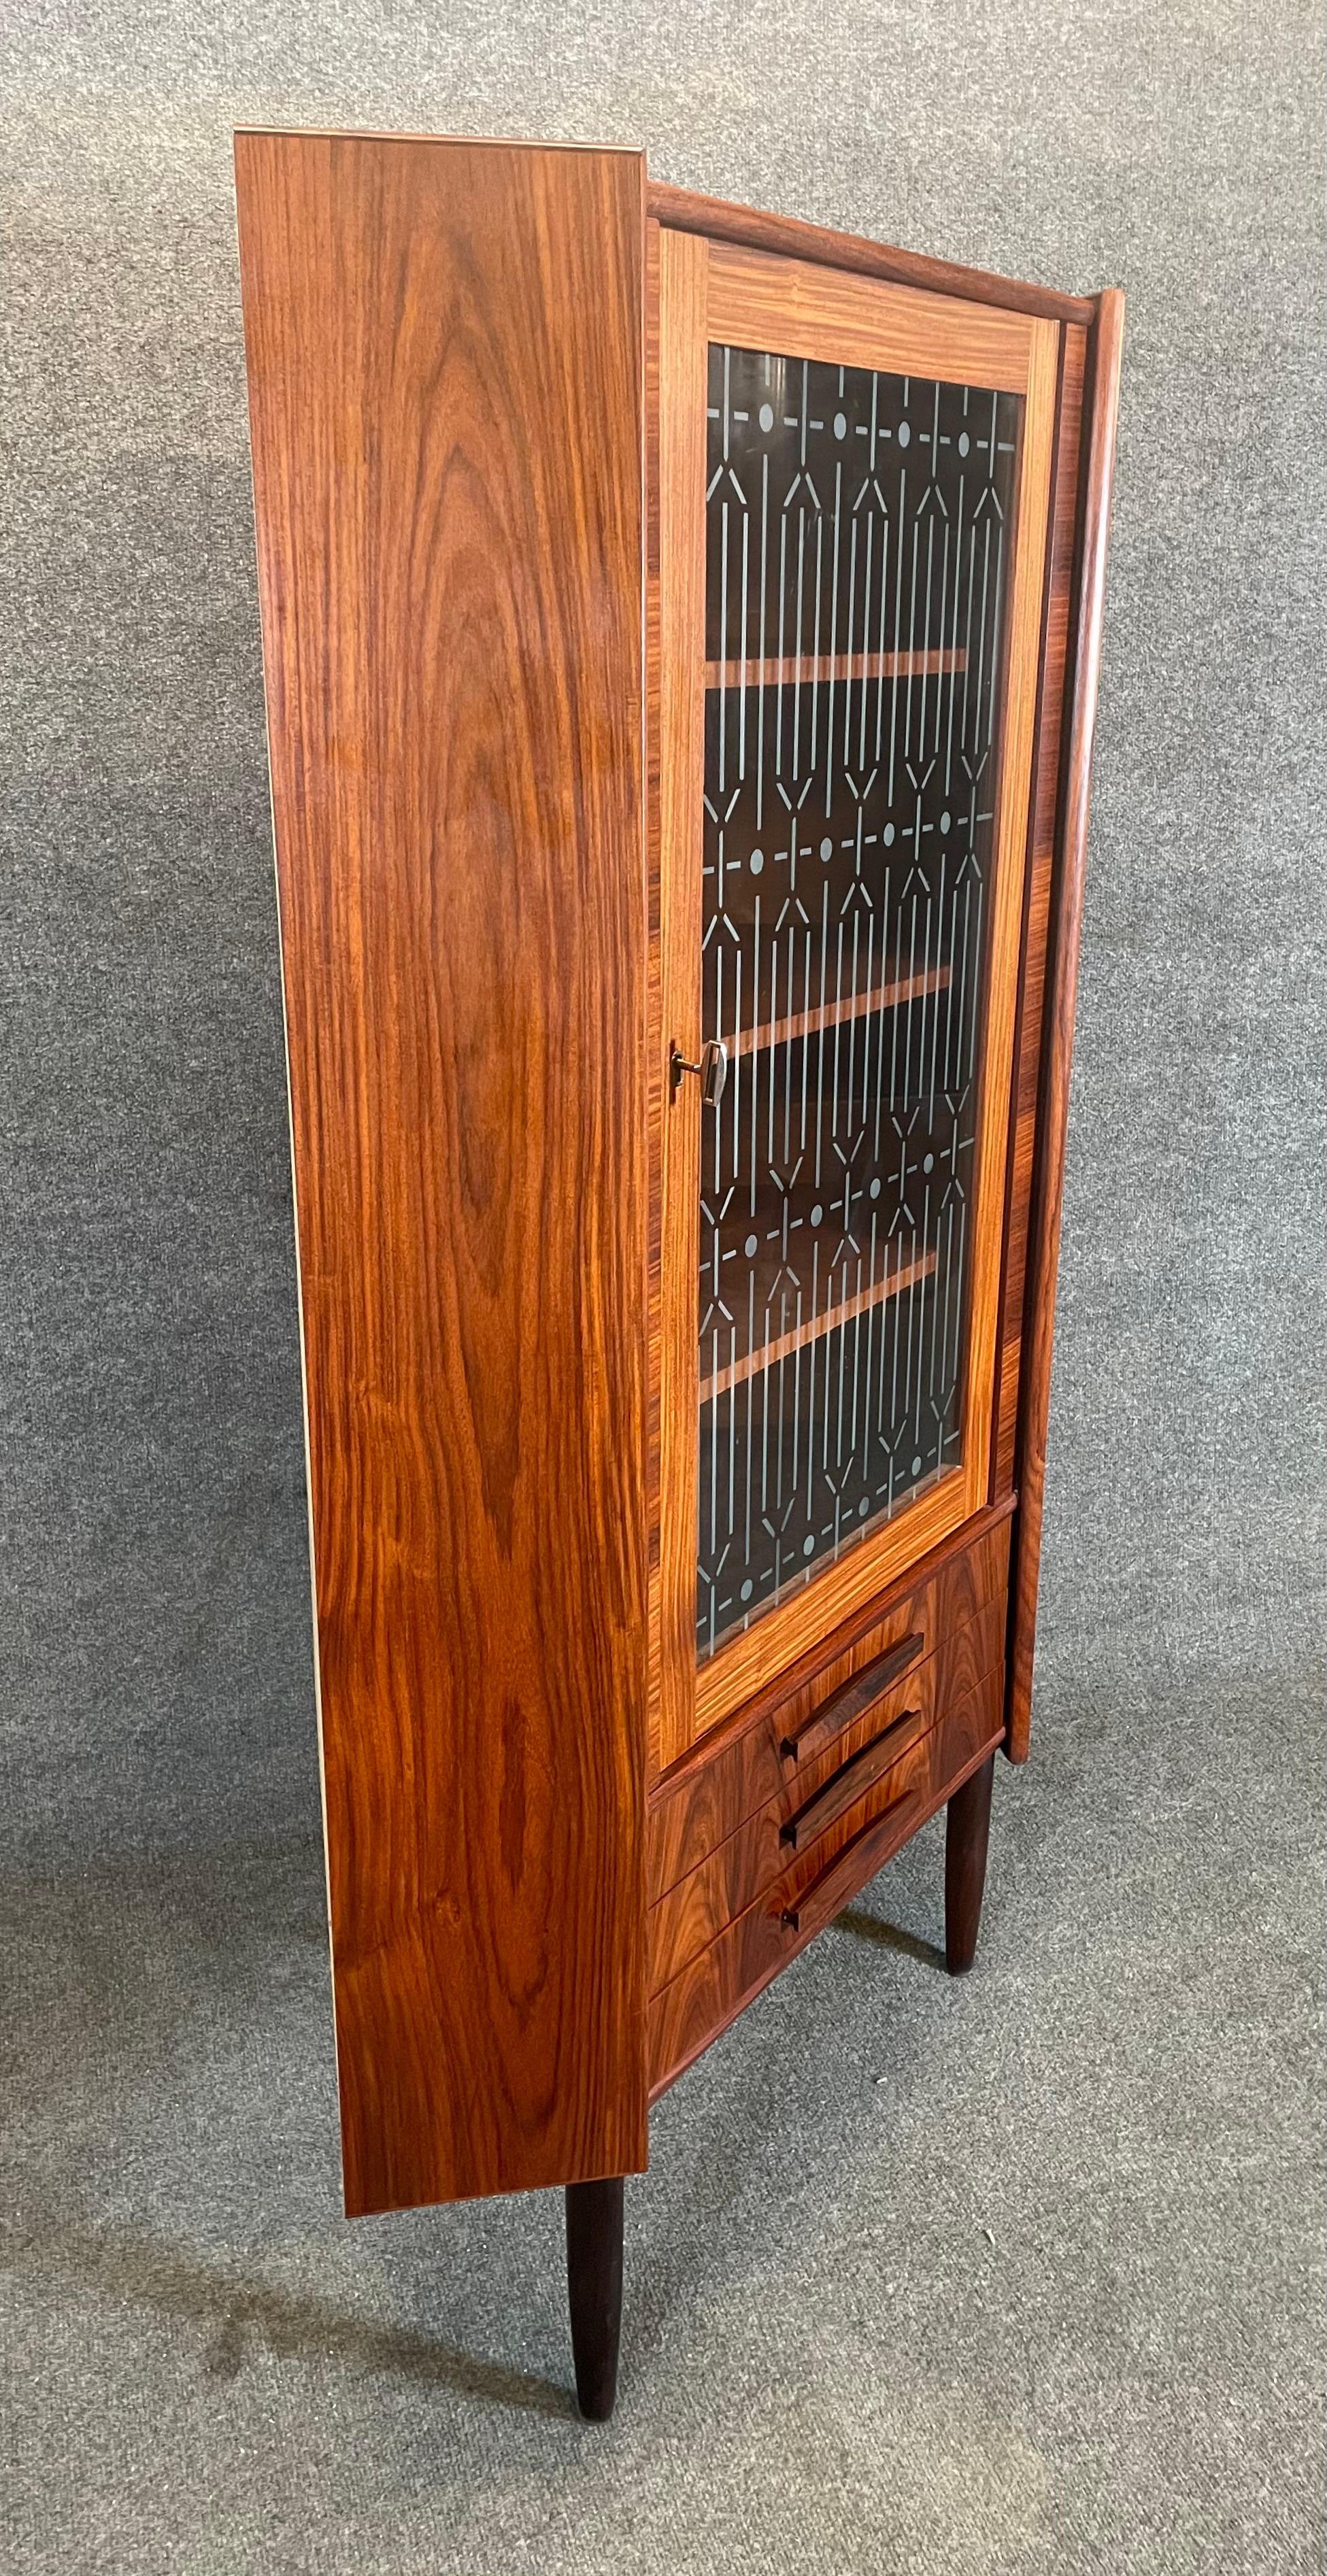 Mid-20th Century Vintage Danish Mid Century Modern Rosewood Corner Cabinet With Etched Glass